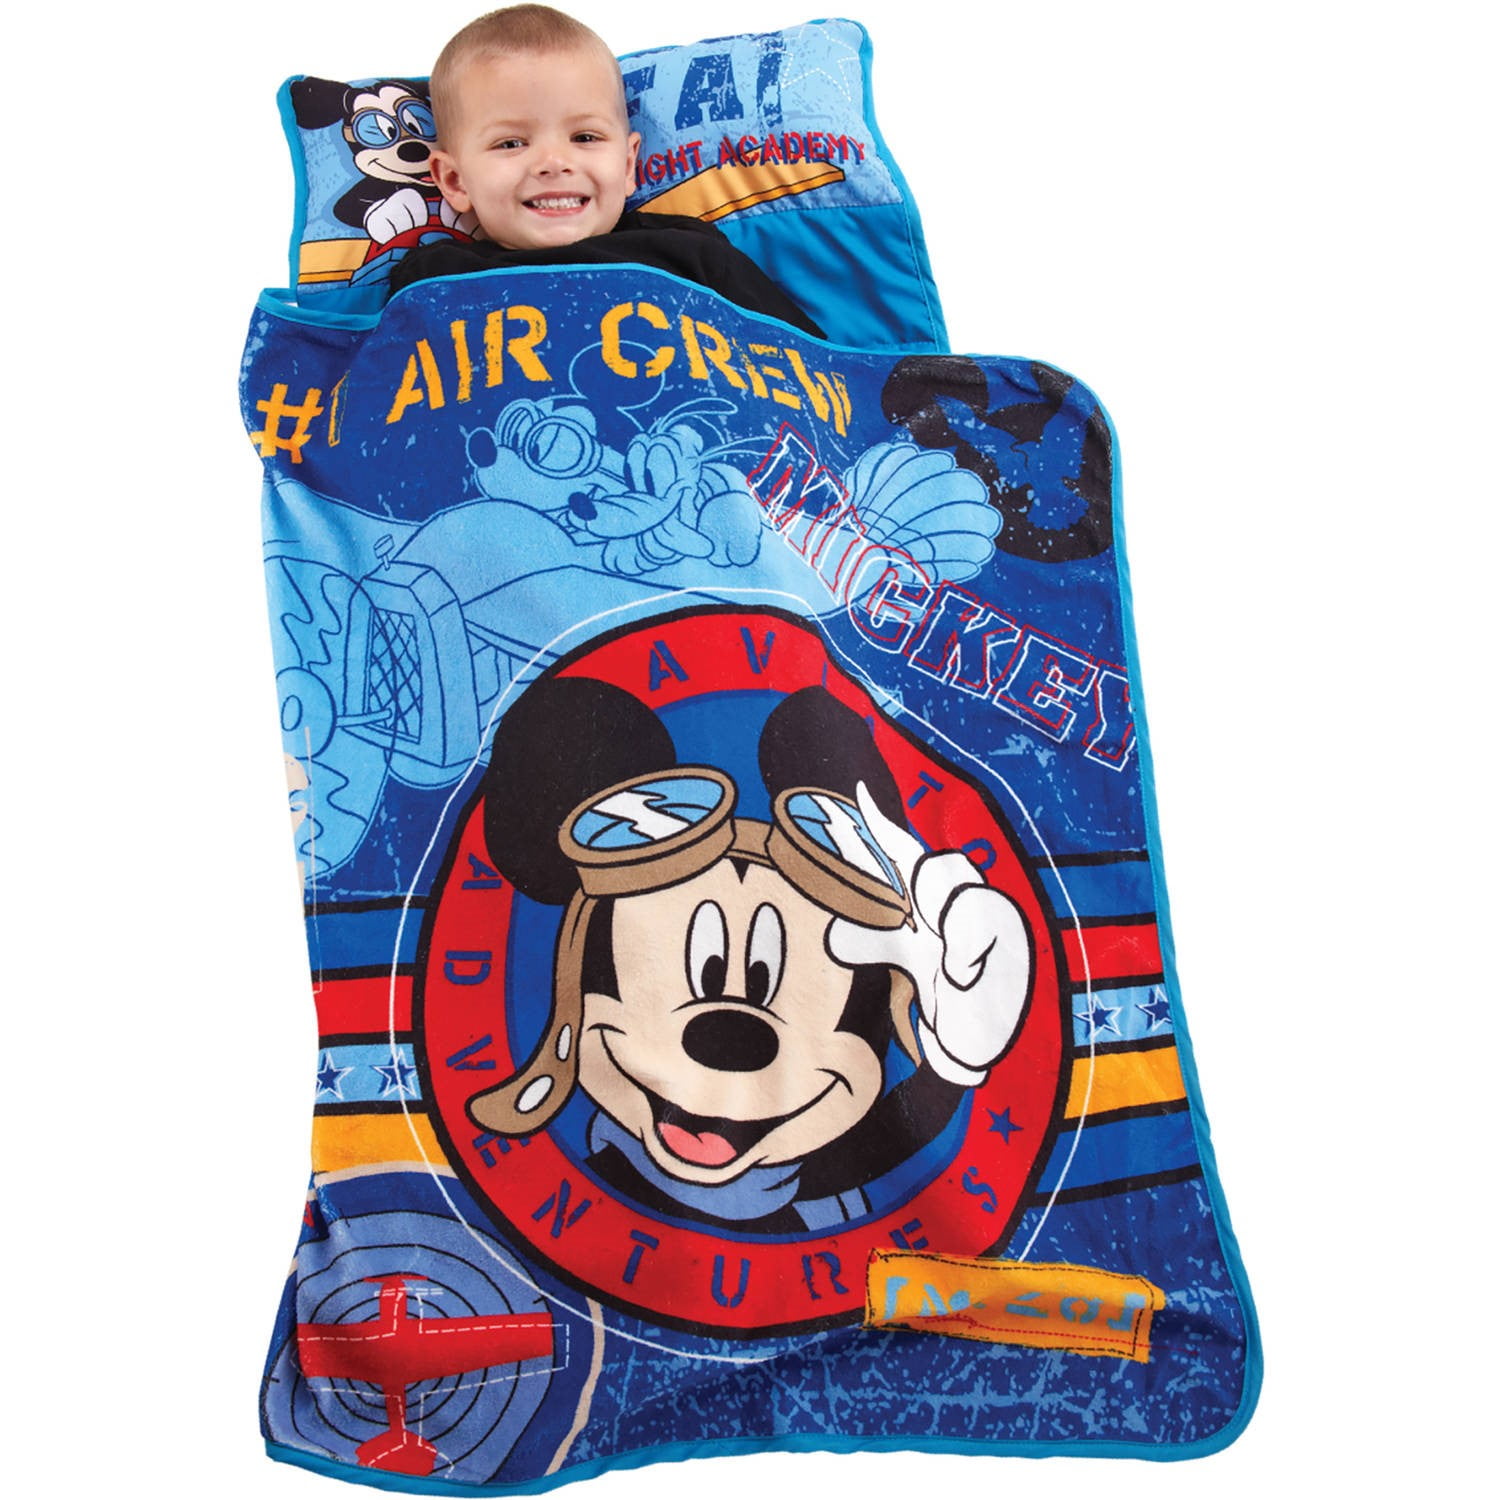 Red Disney Mickey Mouse Clubhouse Buddies Padded Toddler Nap Mat with Built in Pillow Grey Yellow & Name Label for Daycare Kindergarten or Travel Blue Fleece Blanket 